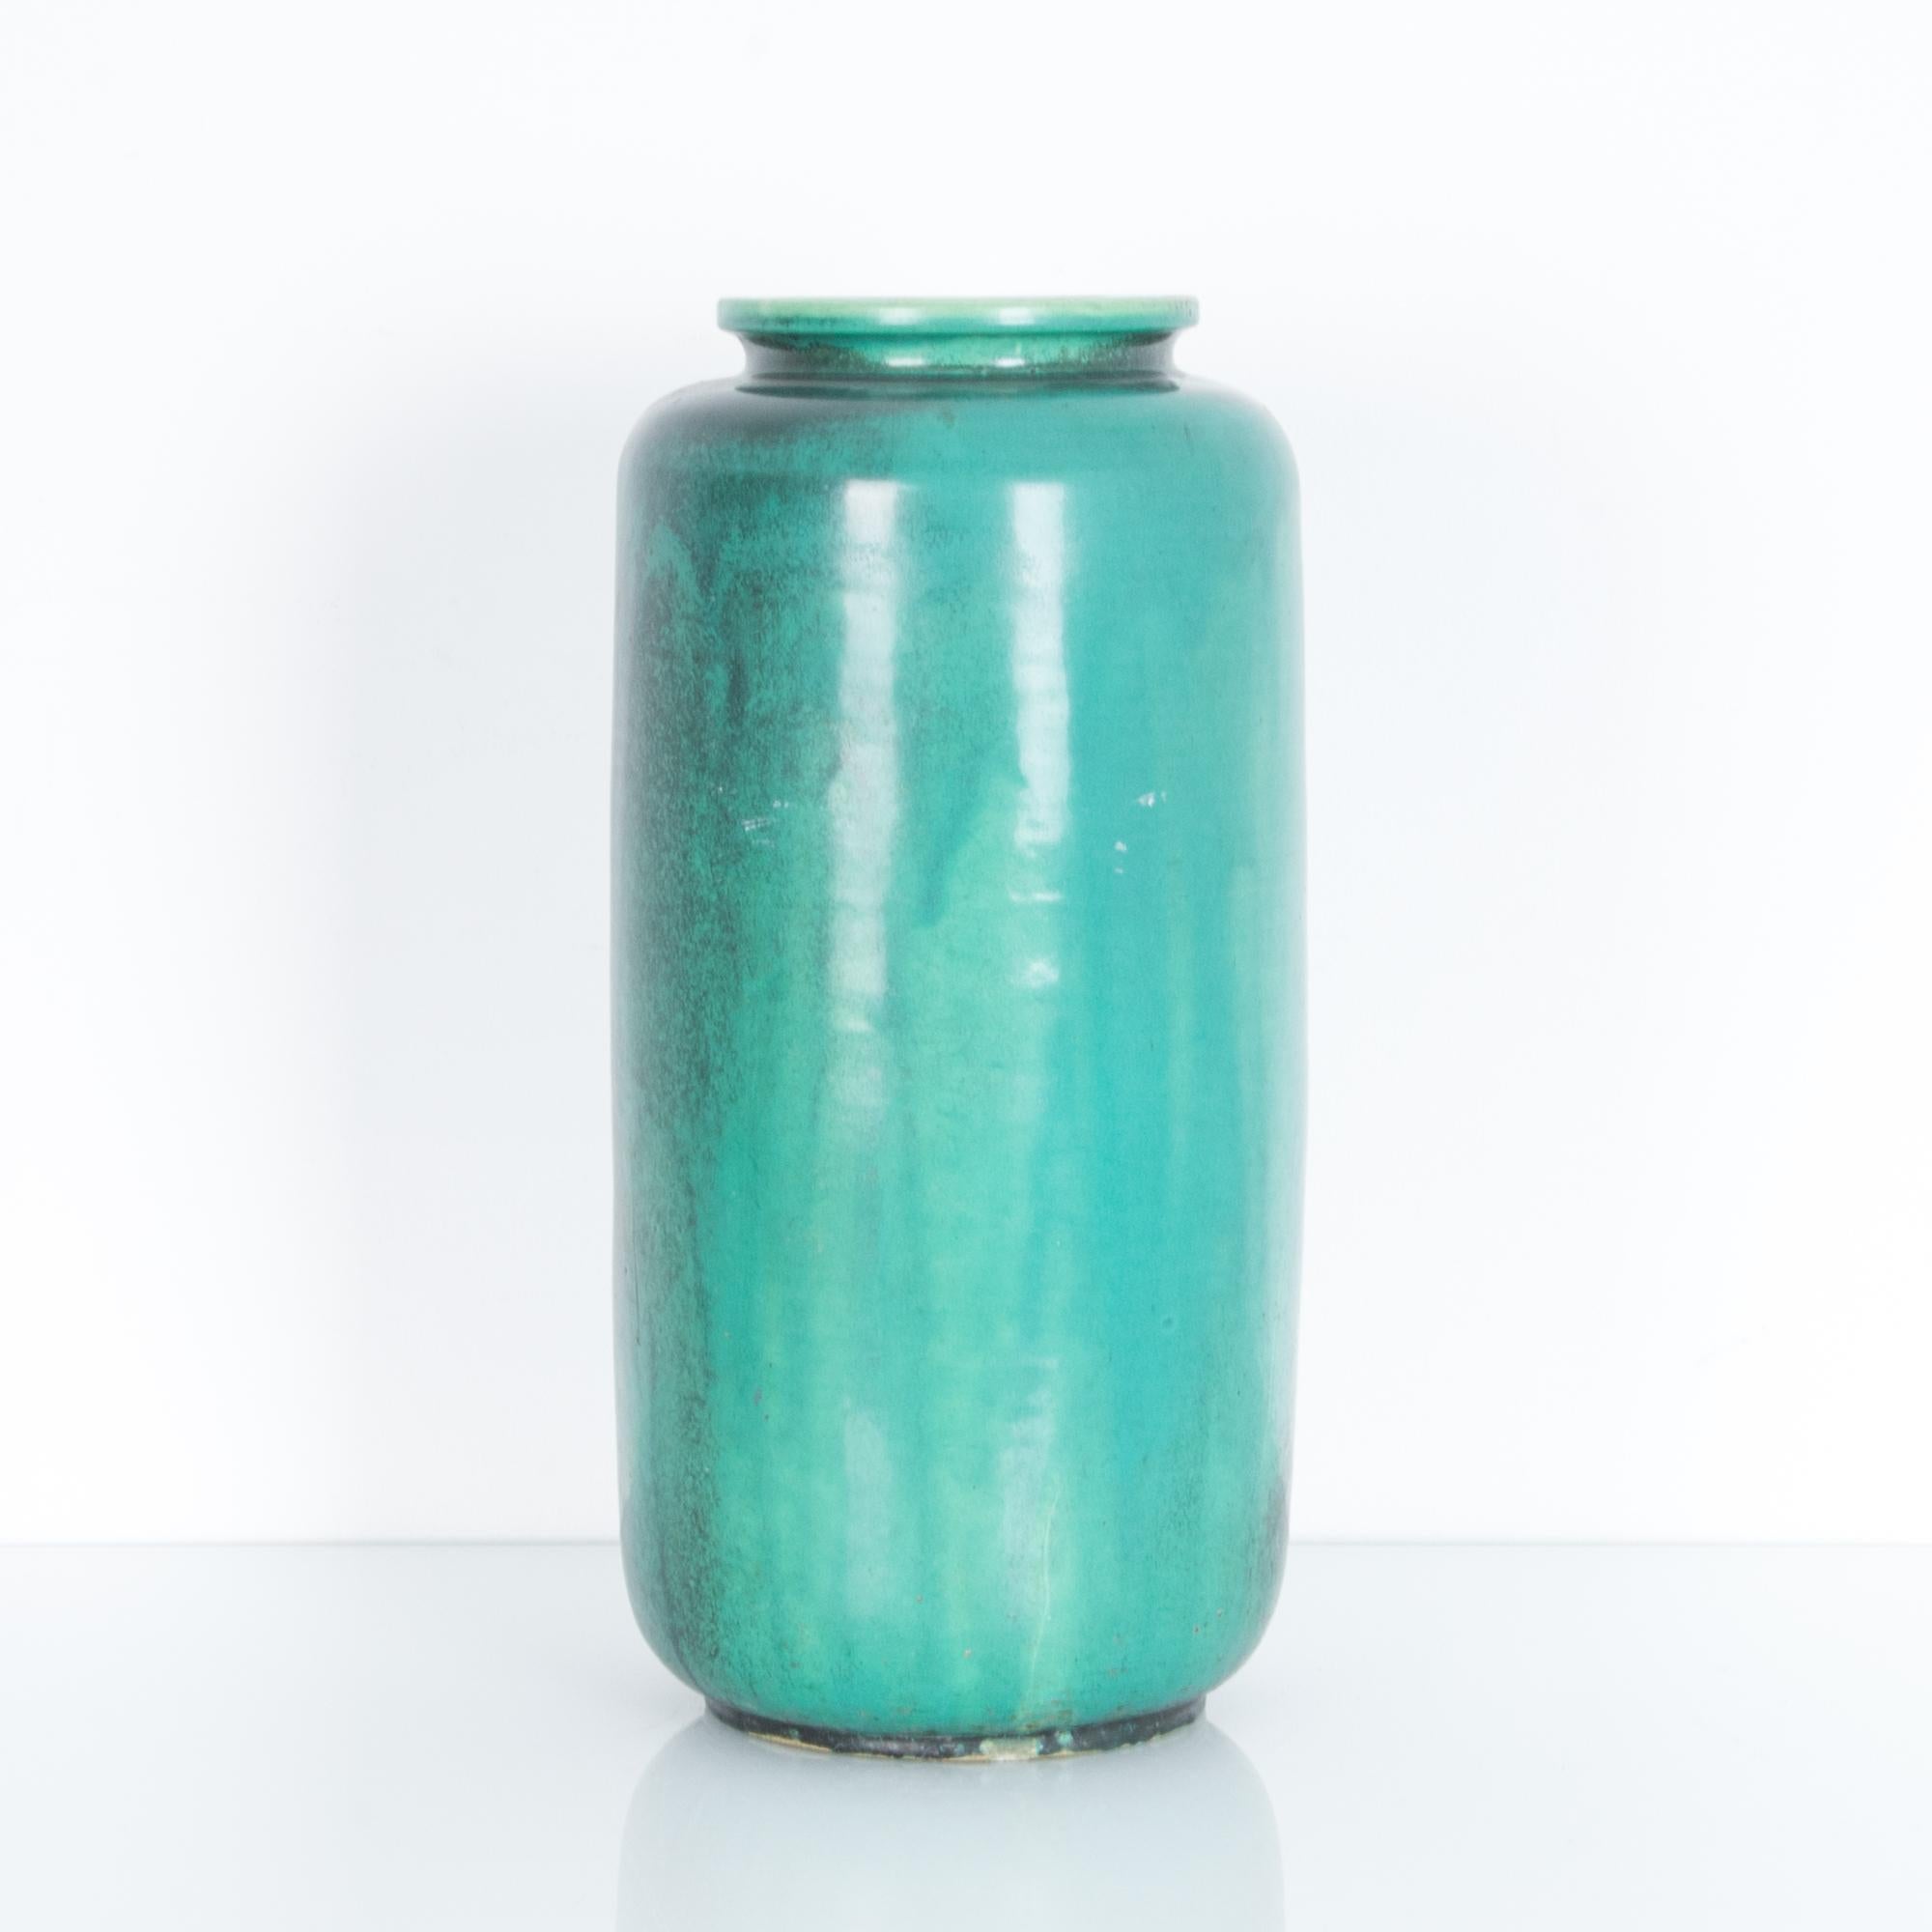 A bold minimal shape, with delicately formed rim. This circa 1960s German vase is glazed with a bright green blue. These characteristic mid-20th century ceramics were produced in West Germany, featuring “W. Germany